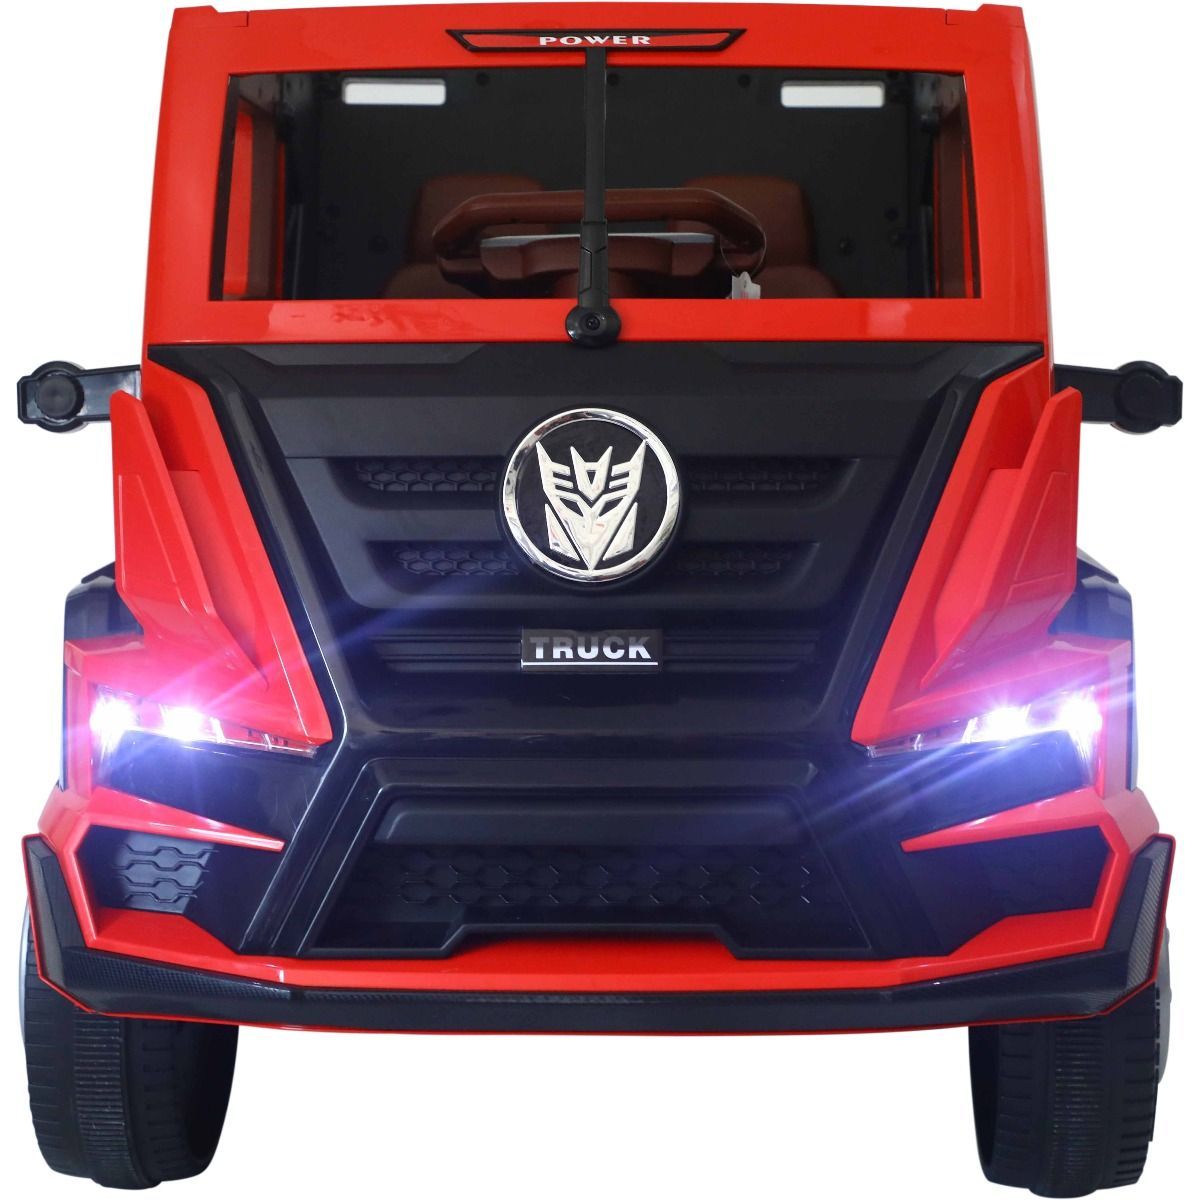 Red Ride On Lorry Without Trailer For Kids 12V Front Light